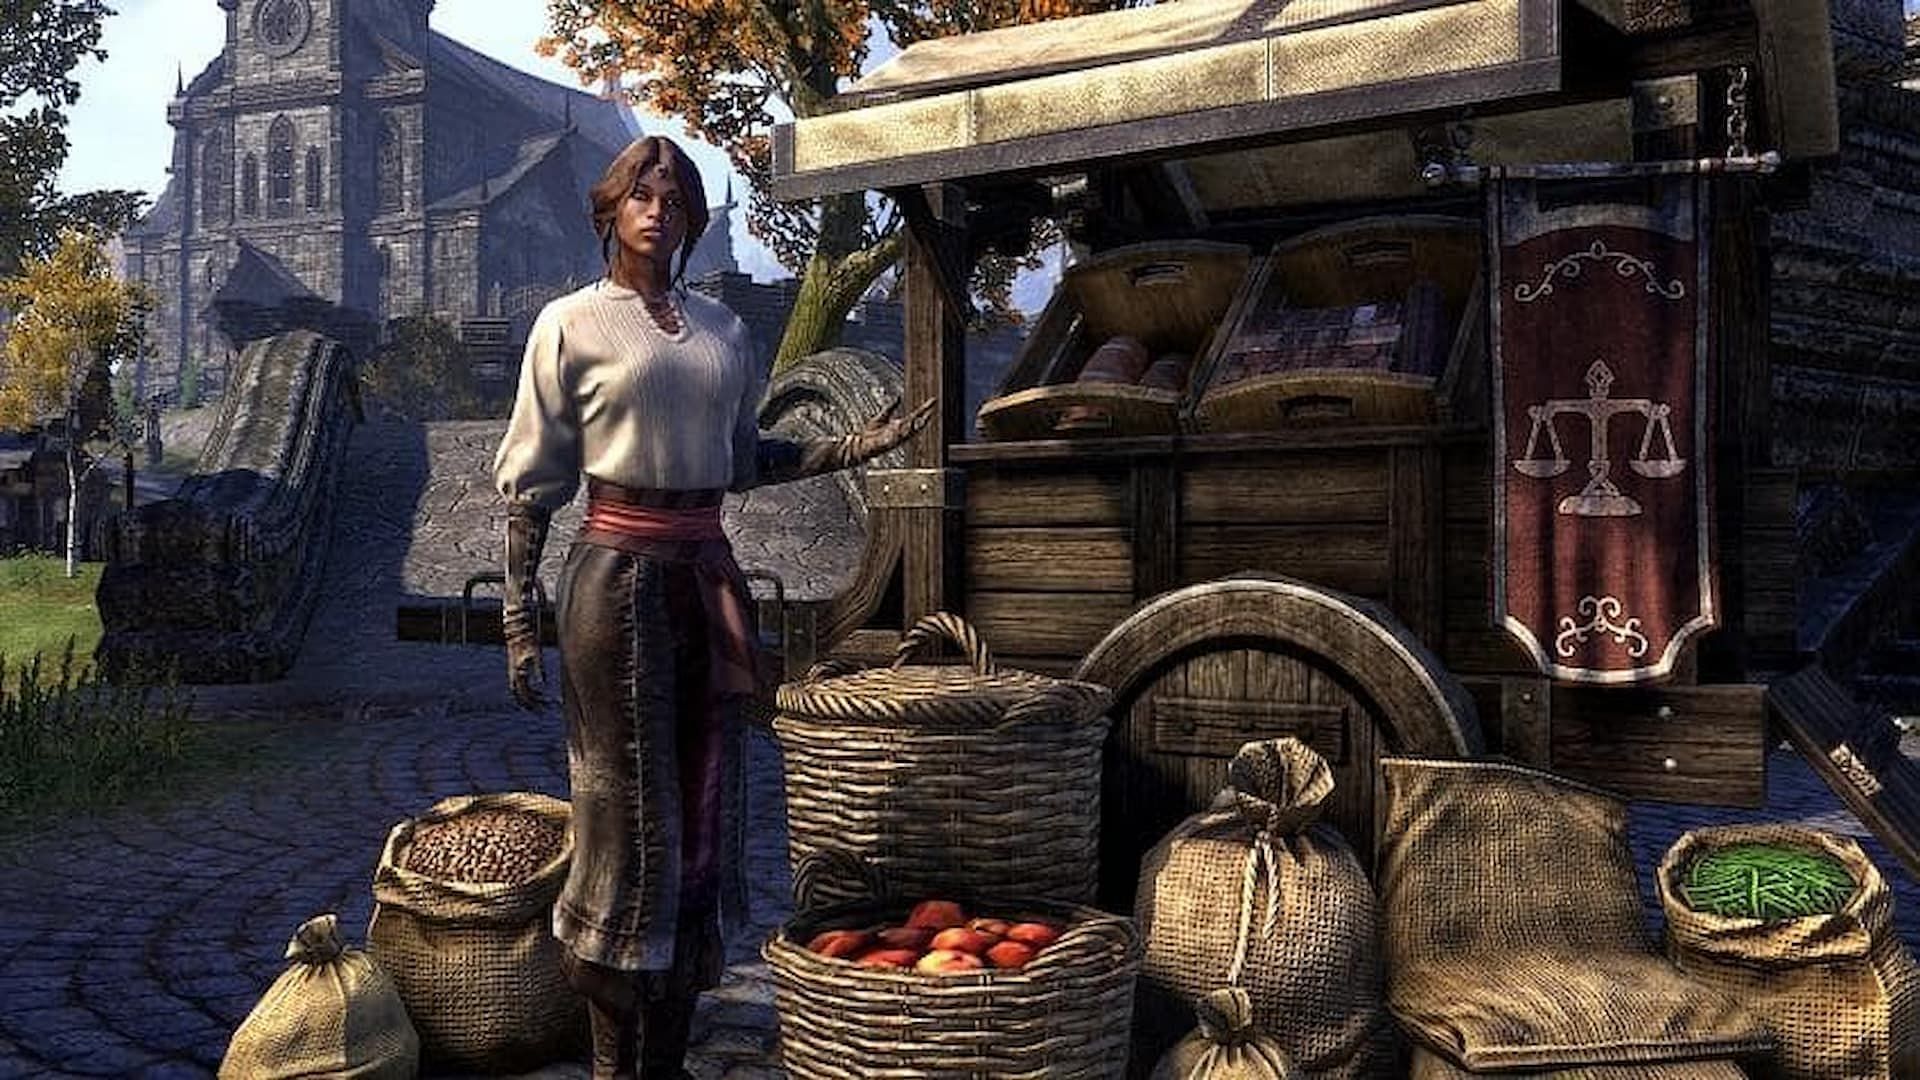 A merchant in The Elder Scrolls Online with bags of fruits and vegetables like apples